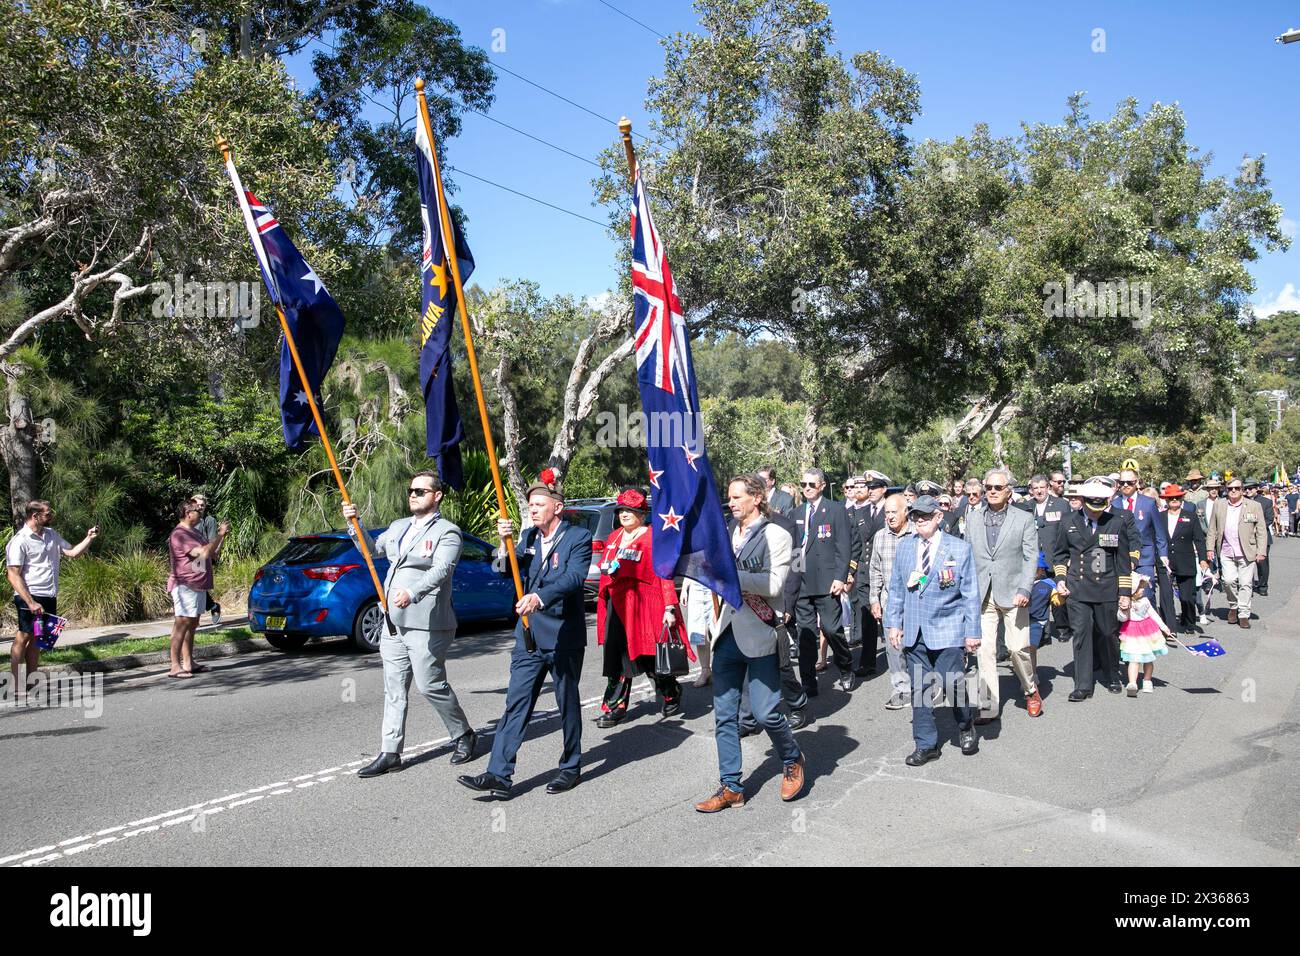 Sydney,Australia, Thursday 25th April 2024. In the small Sydney suburb of Avalon Beach thousands of people turned out to watch the ANZAC Day march and service that followed in Dunbar Park, organised by Avalon Beach RSL Sub branch. ANZAC Day in Australia is a national day of remembrance that celebrates those Australians and New Zealanders and allies who gave their lives in battle. Lest We Forget. We shall remember them. Credit Martin Berry@alamy live news Stock Photo